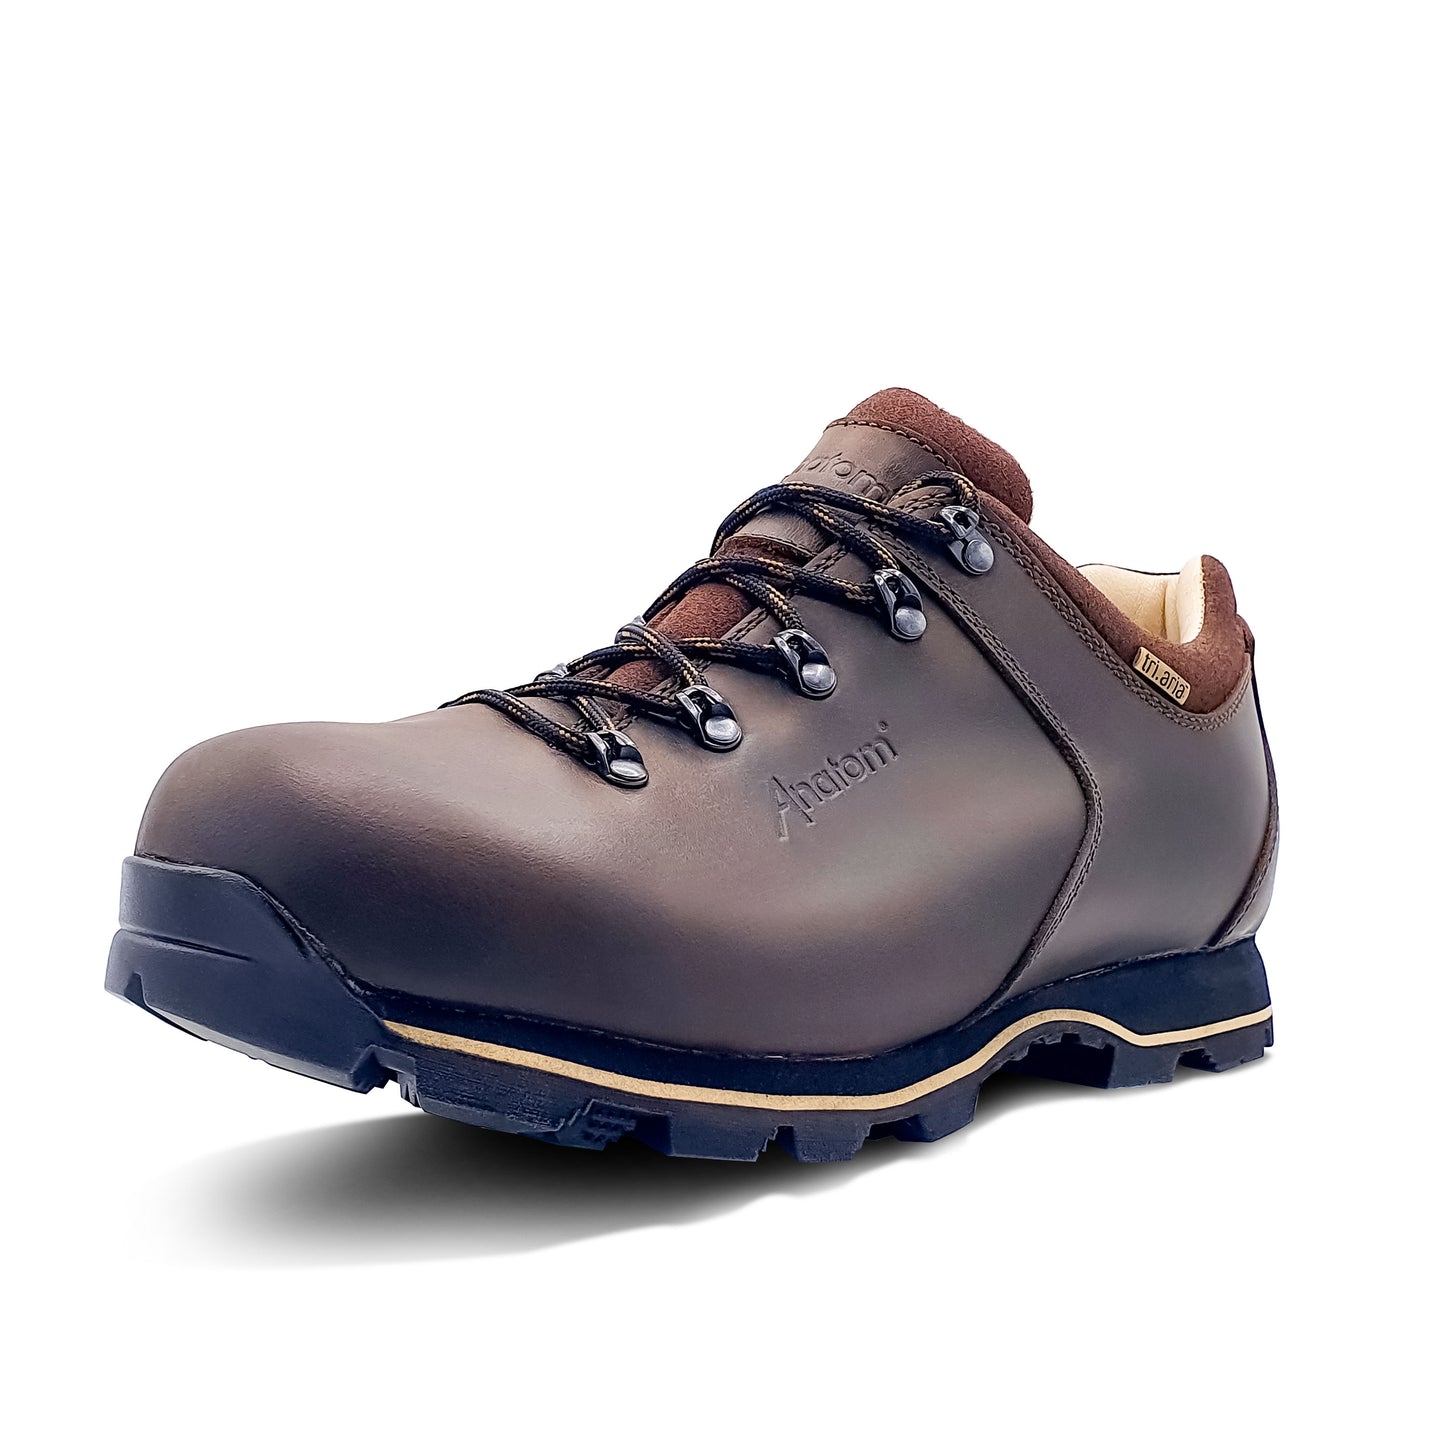 ANATOM Q1 Braemar Walking Shoe with Vibram outsole - PRE-ORDERS AVAILABLE FOR DELIVERY AUTUMN 24